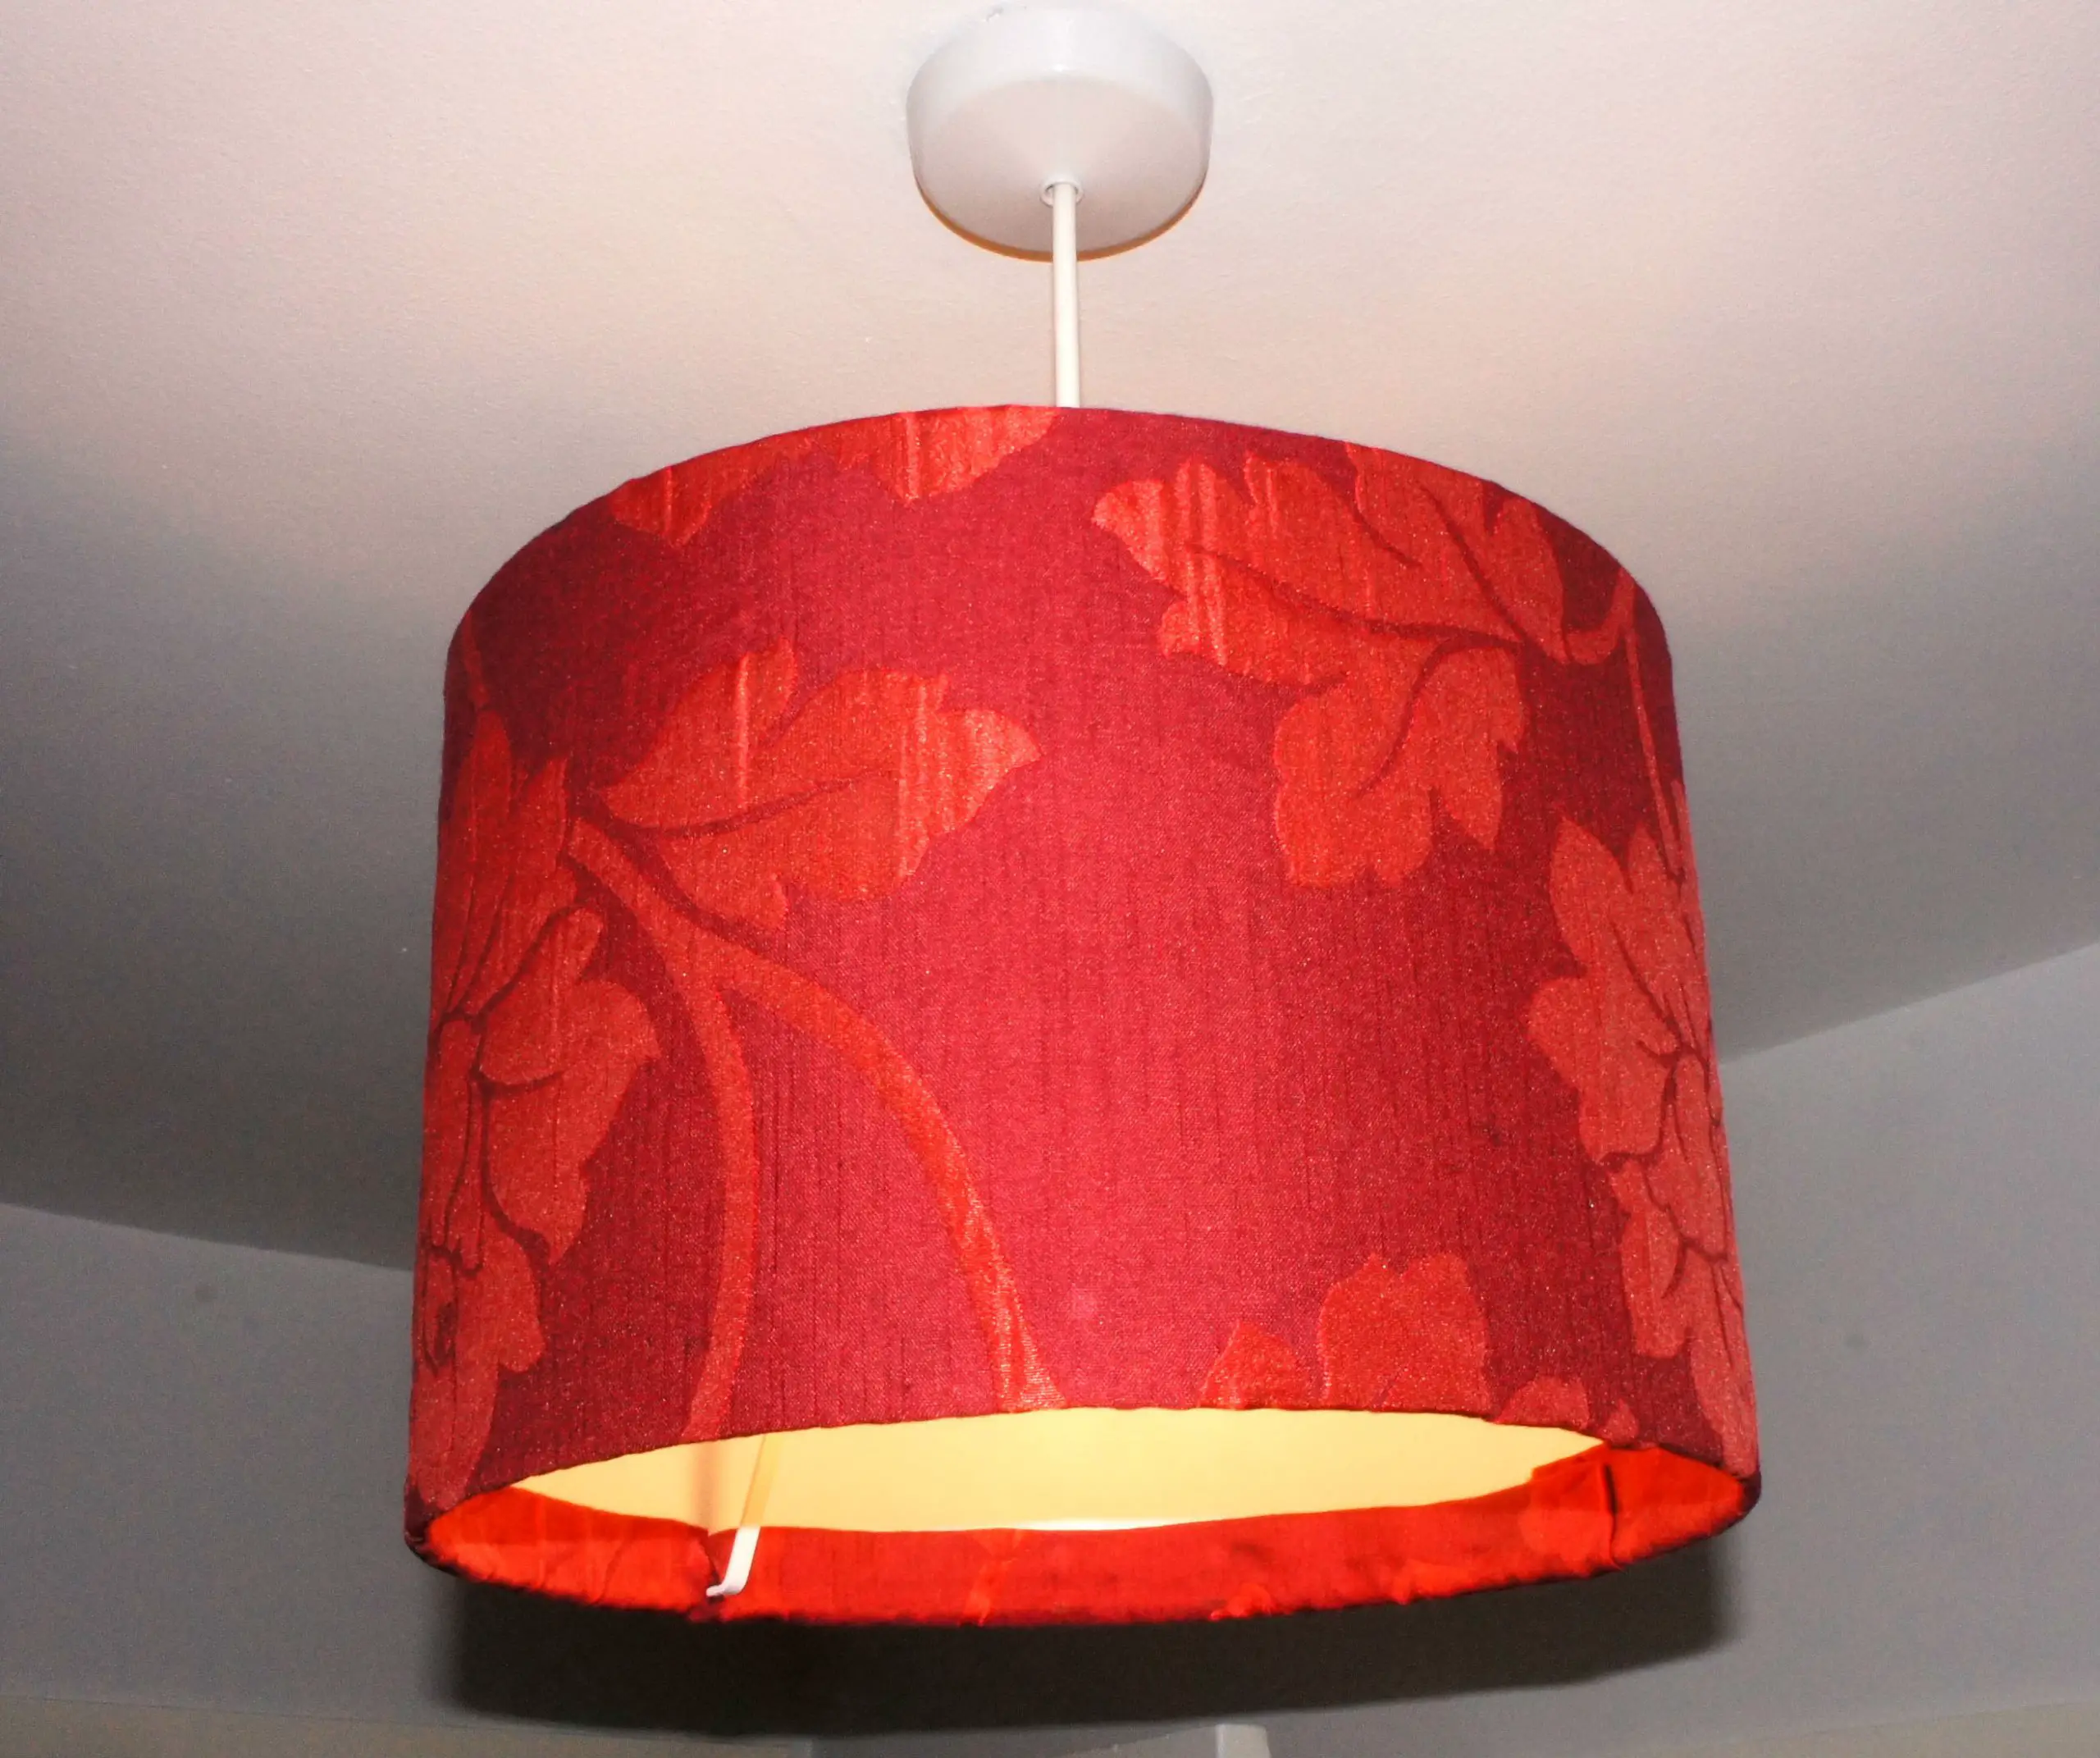 Re-covered Lampshade